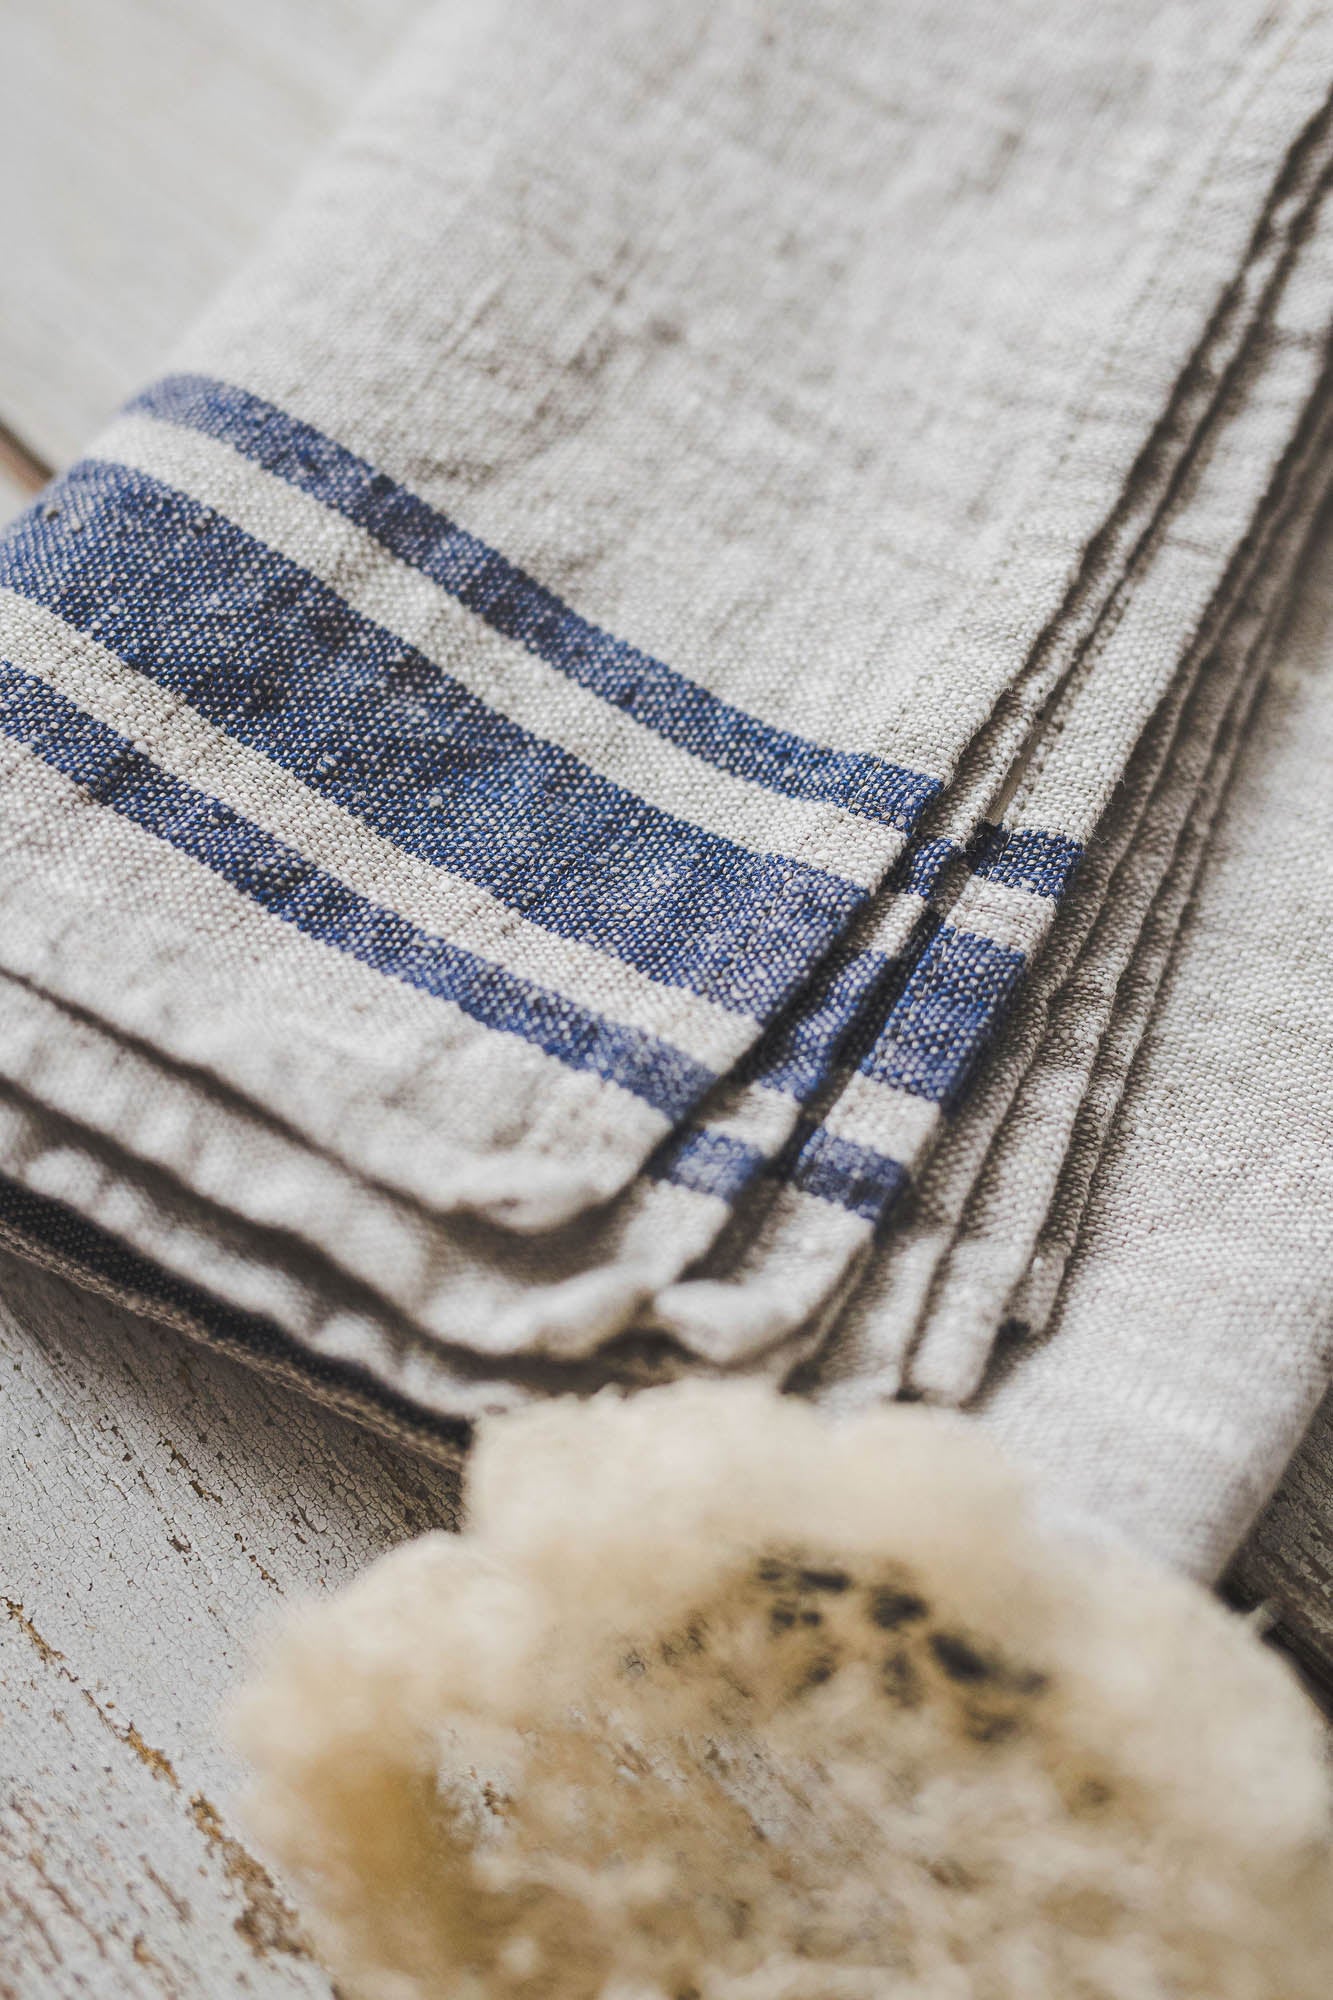 French style linen bath towels with blue stripes